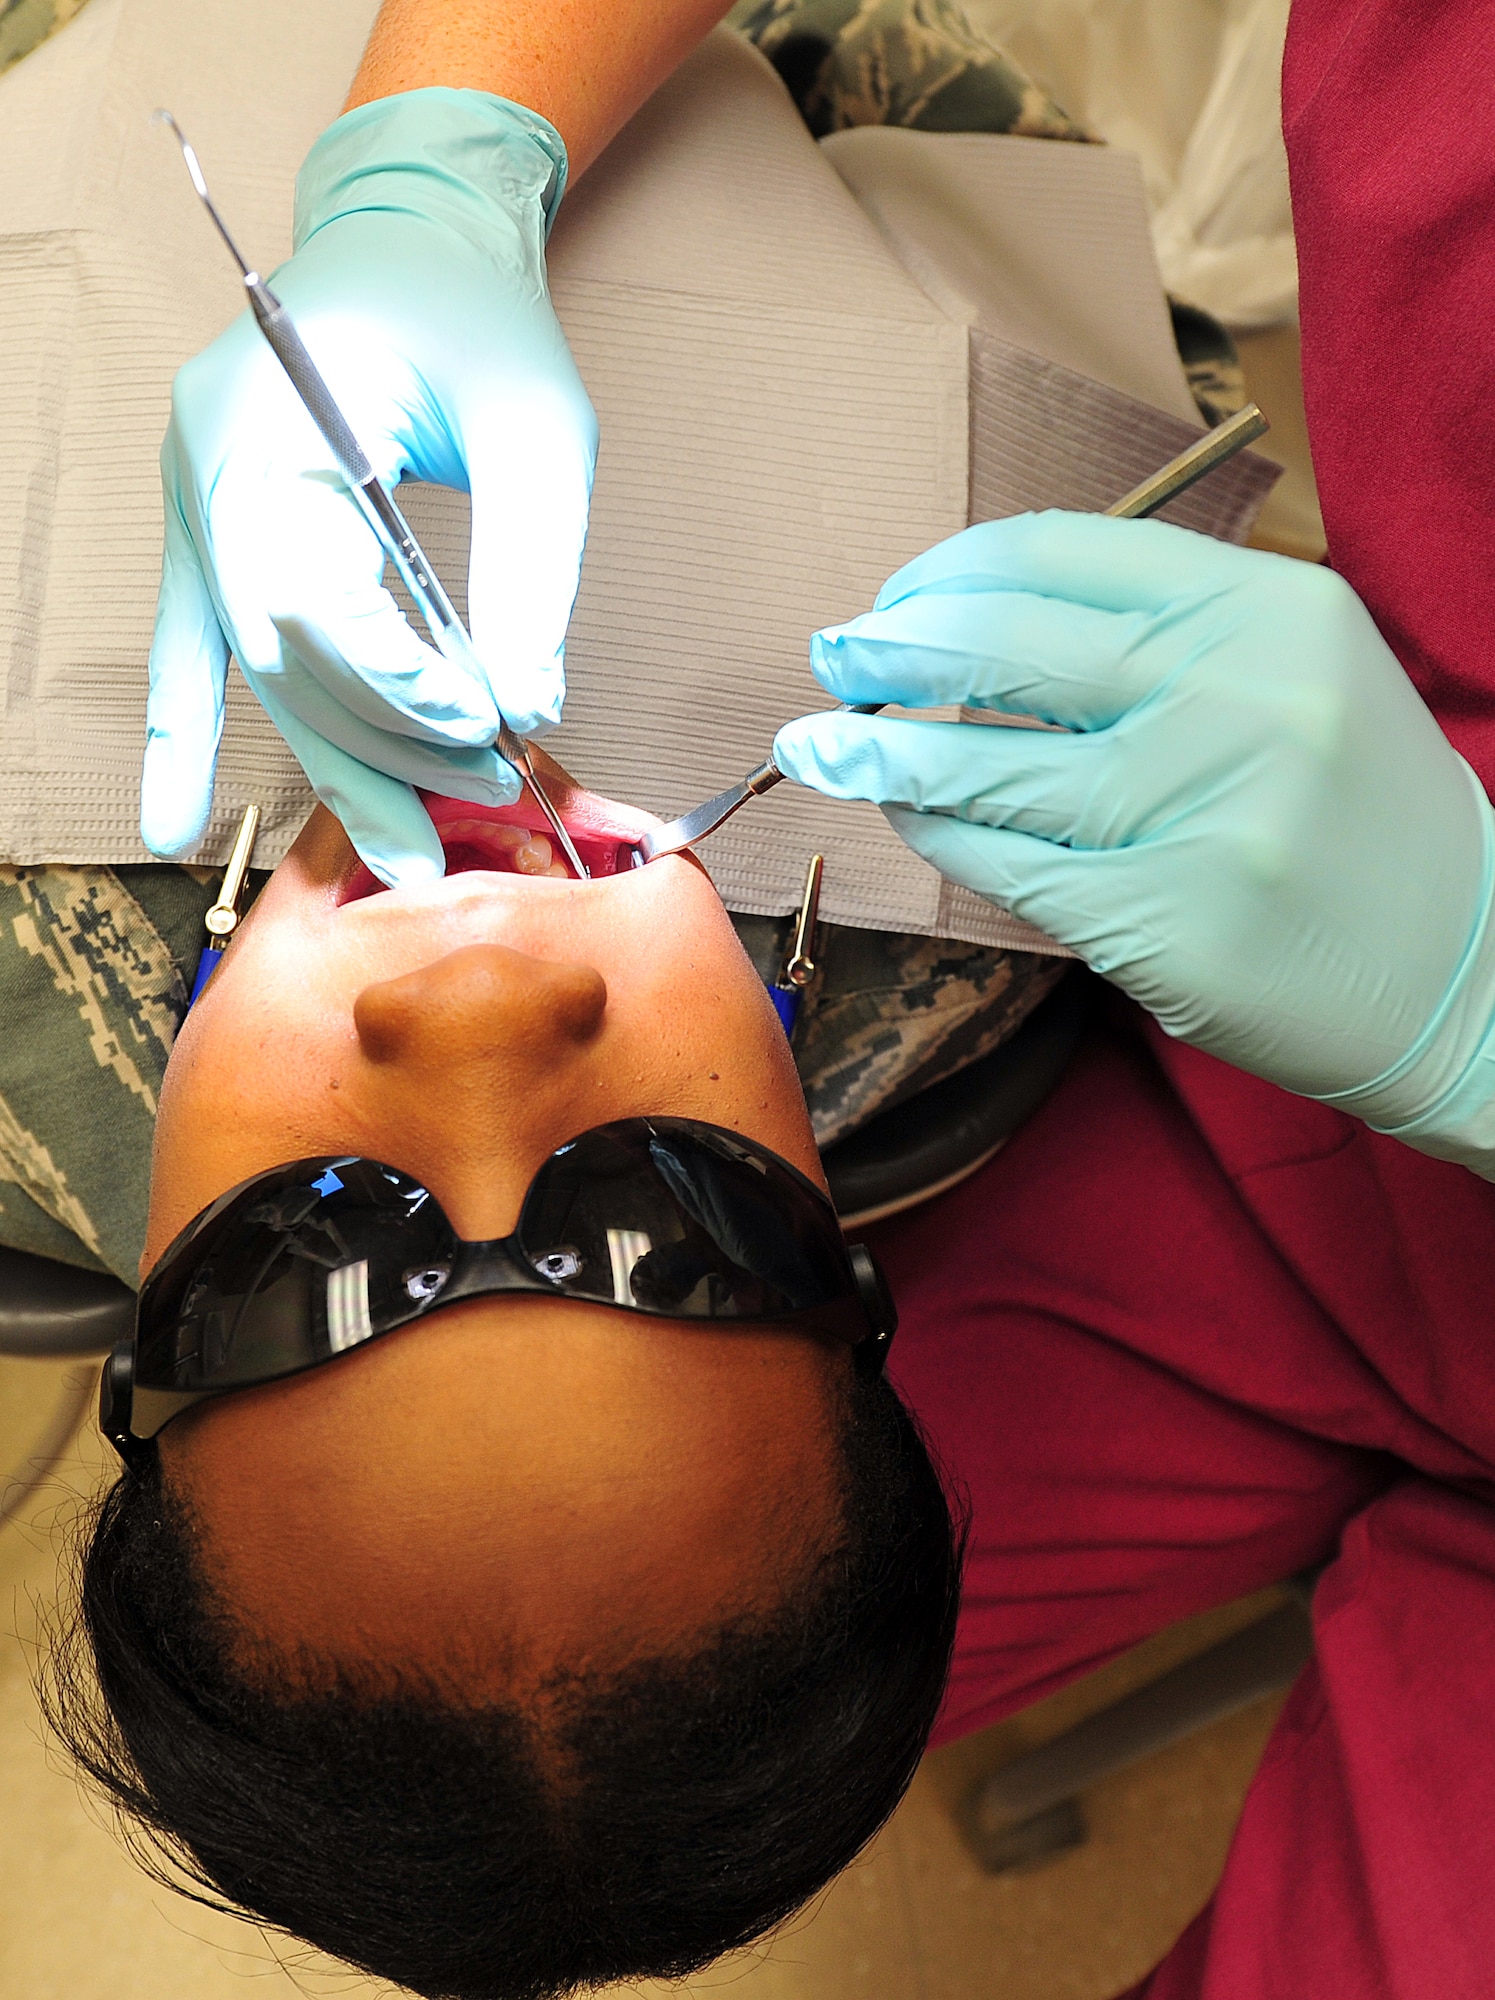 Senior Airman Amy Davey, dental assistant from the 92nd Aerospace Medicine Squadron, performs an annual checkup using a dental explorer, an instrument used for screening for periodontal disease, on Staff Sgt. Jasmine Phillips, member of the 92nd Aerospace Medicine Squadron at Fairchild Air Force Base, Wash., Sept. 28, 2012. (U.S. Air Force photo by Airman 1st Class Taylor Curry)